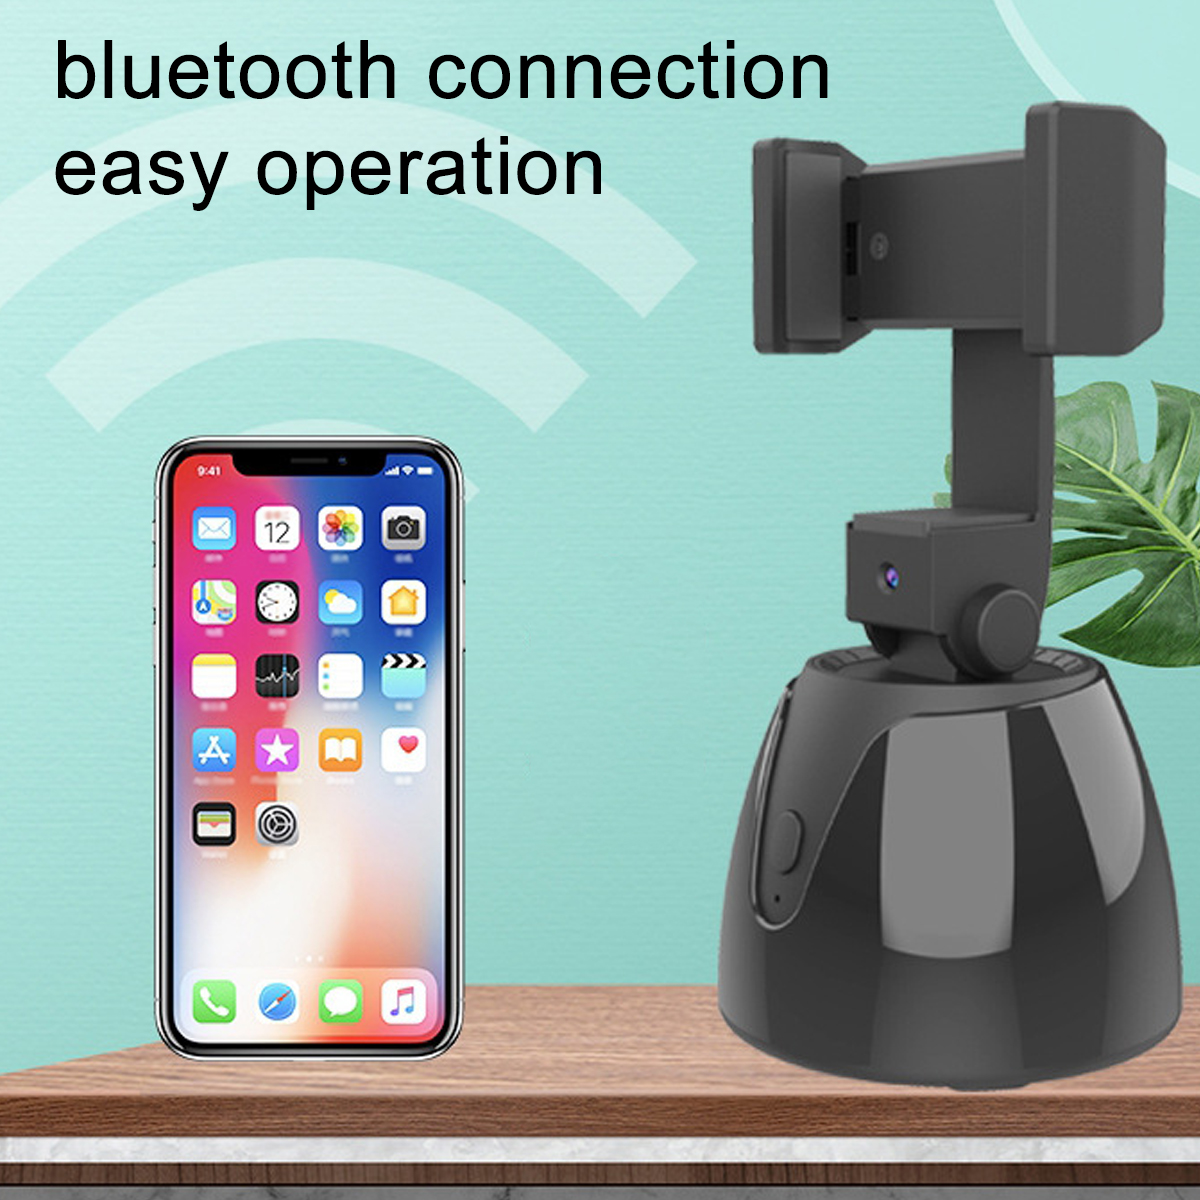 bluetooth-Smart-Gimbal-PTZ-Face-Recognition-ObjectTracking-360deg-Rotatable-Video-1932077-10